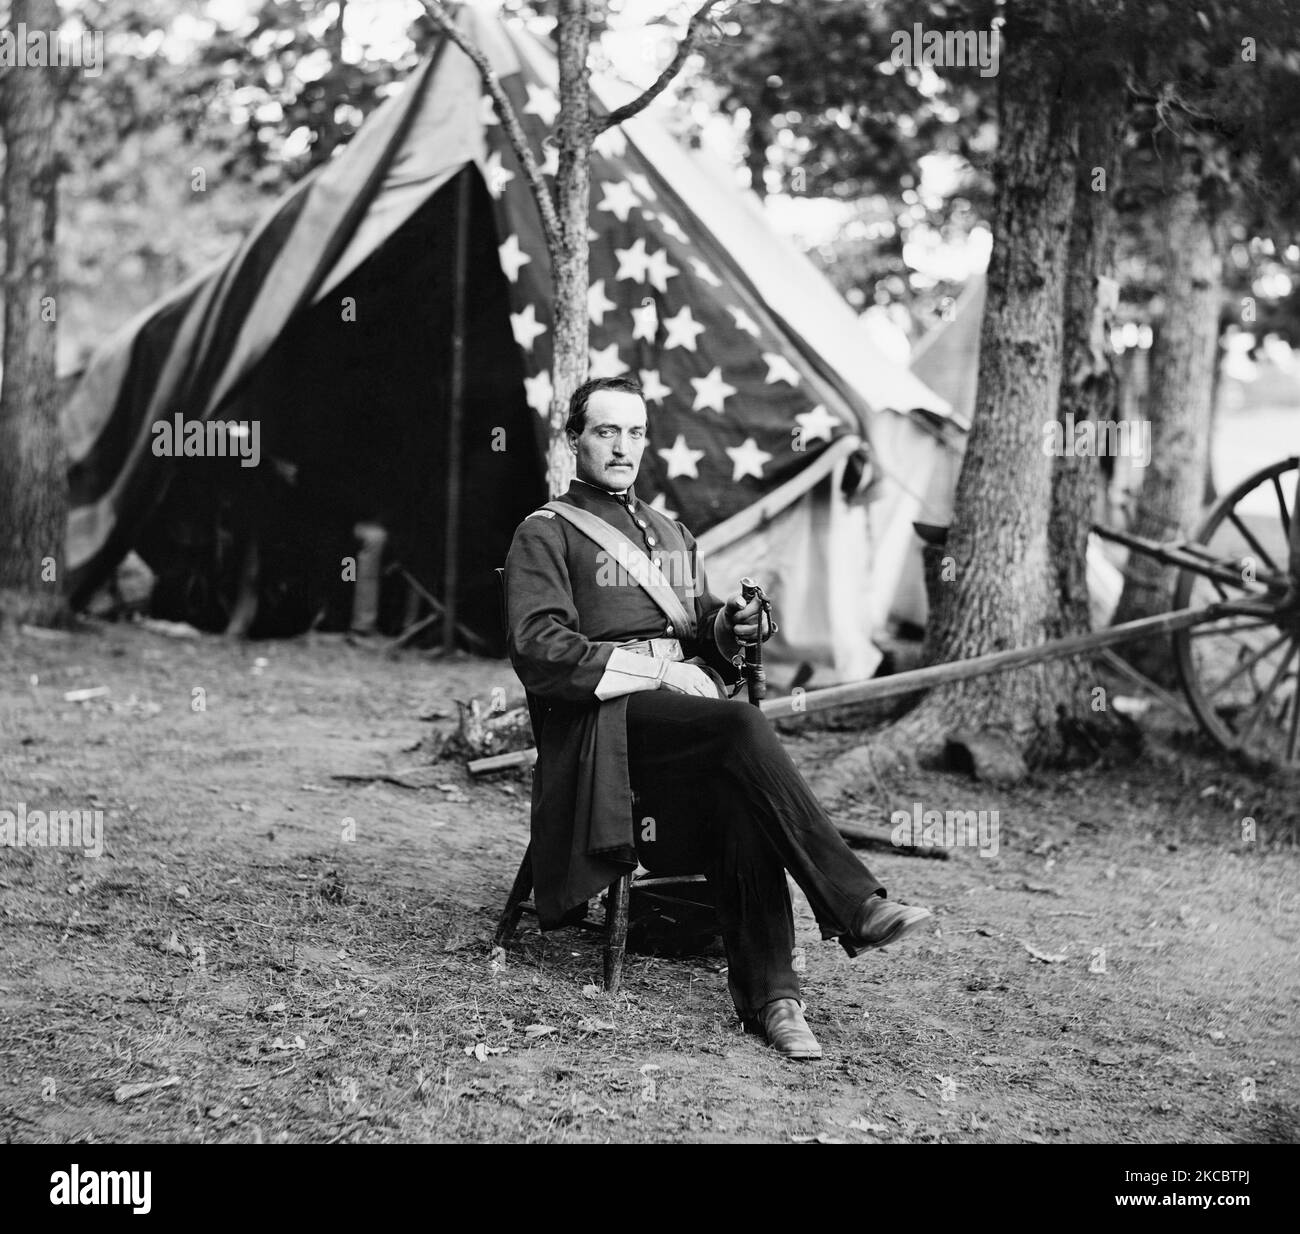 Captain Conyngham of the Irish Brigade in front of his command tent during the Civil War, 1863. Stock Photo